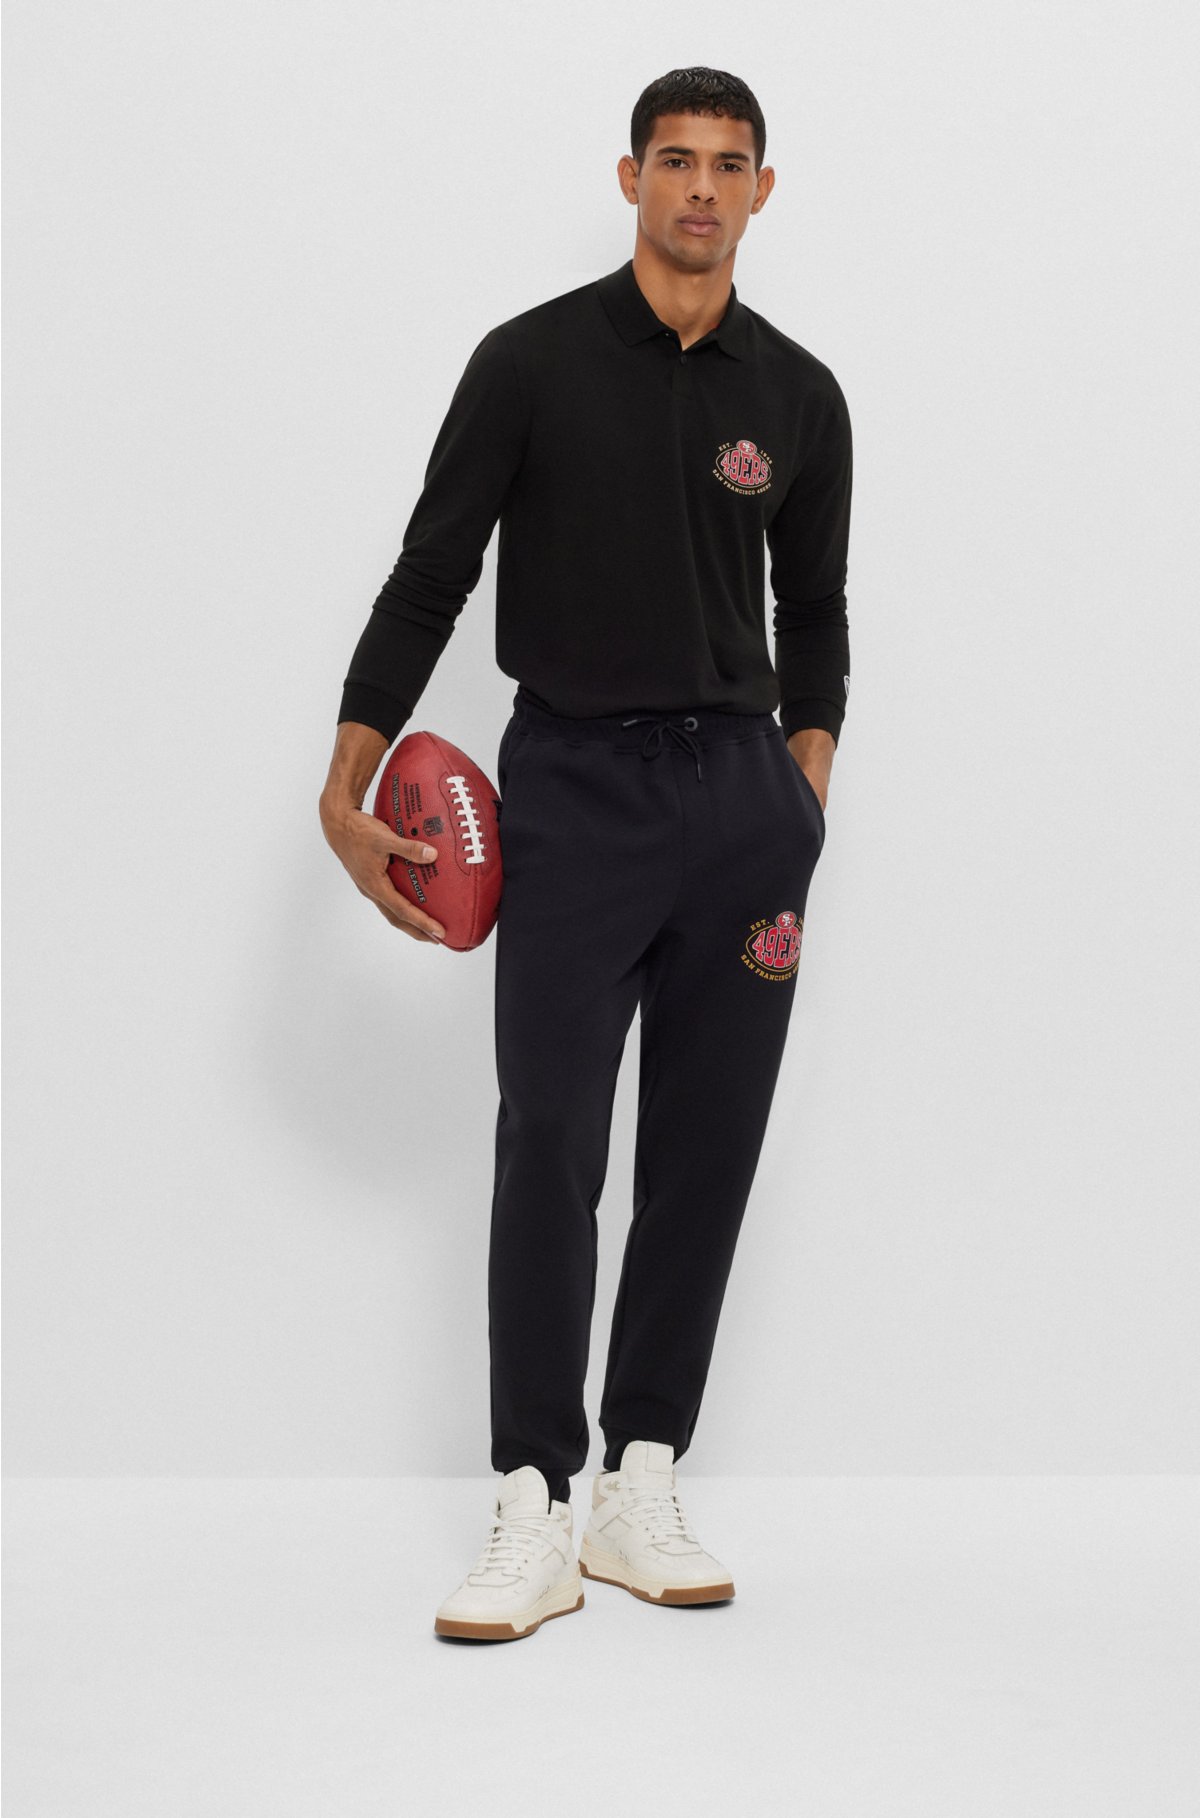 BOSS x NFL long-sleeved polo shirt with collaborative branding, 49ers